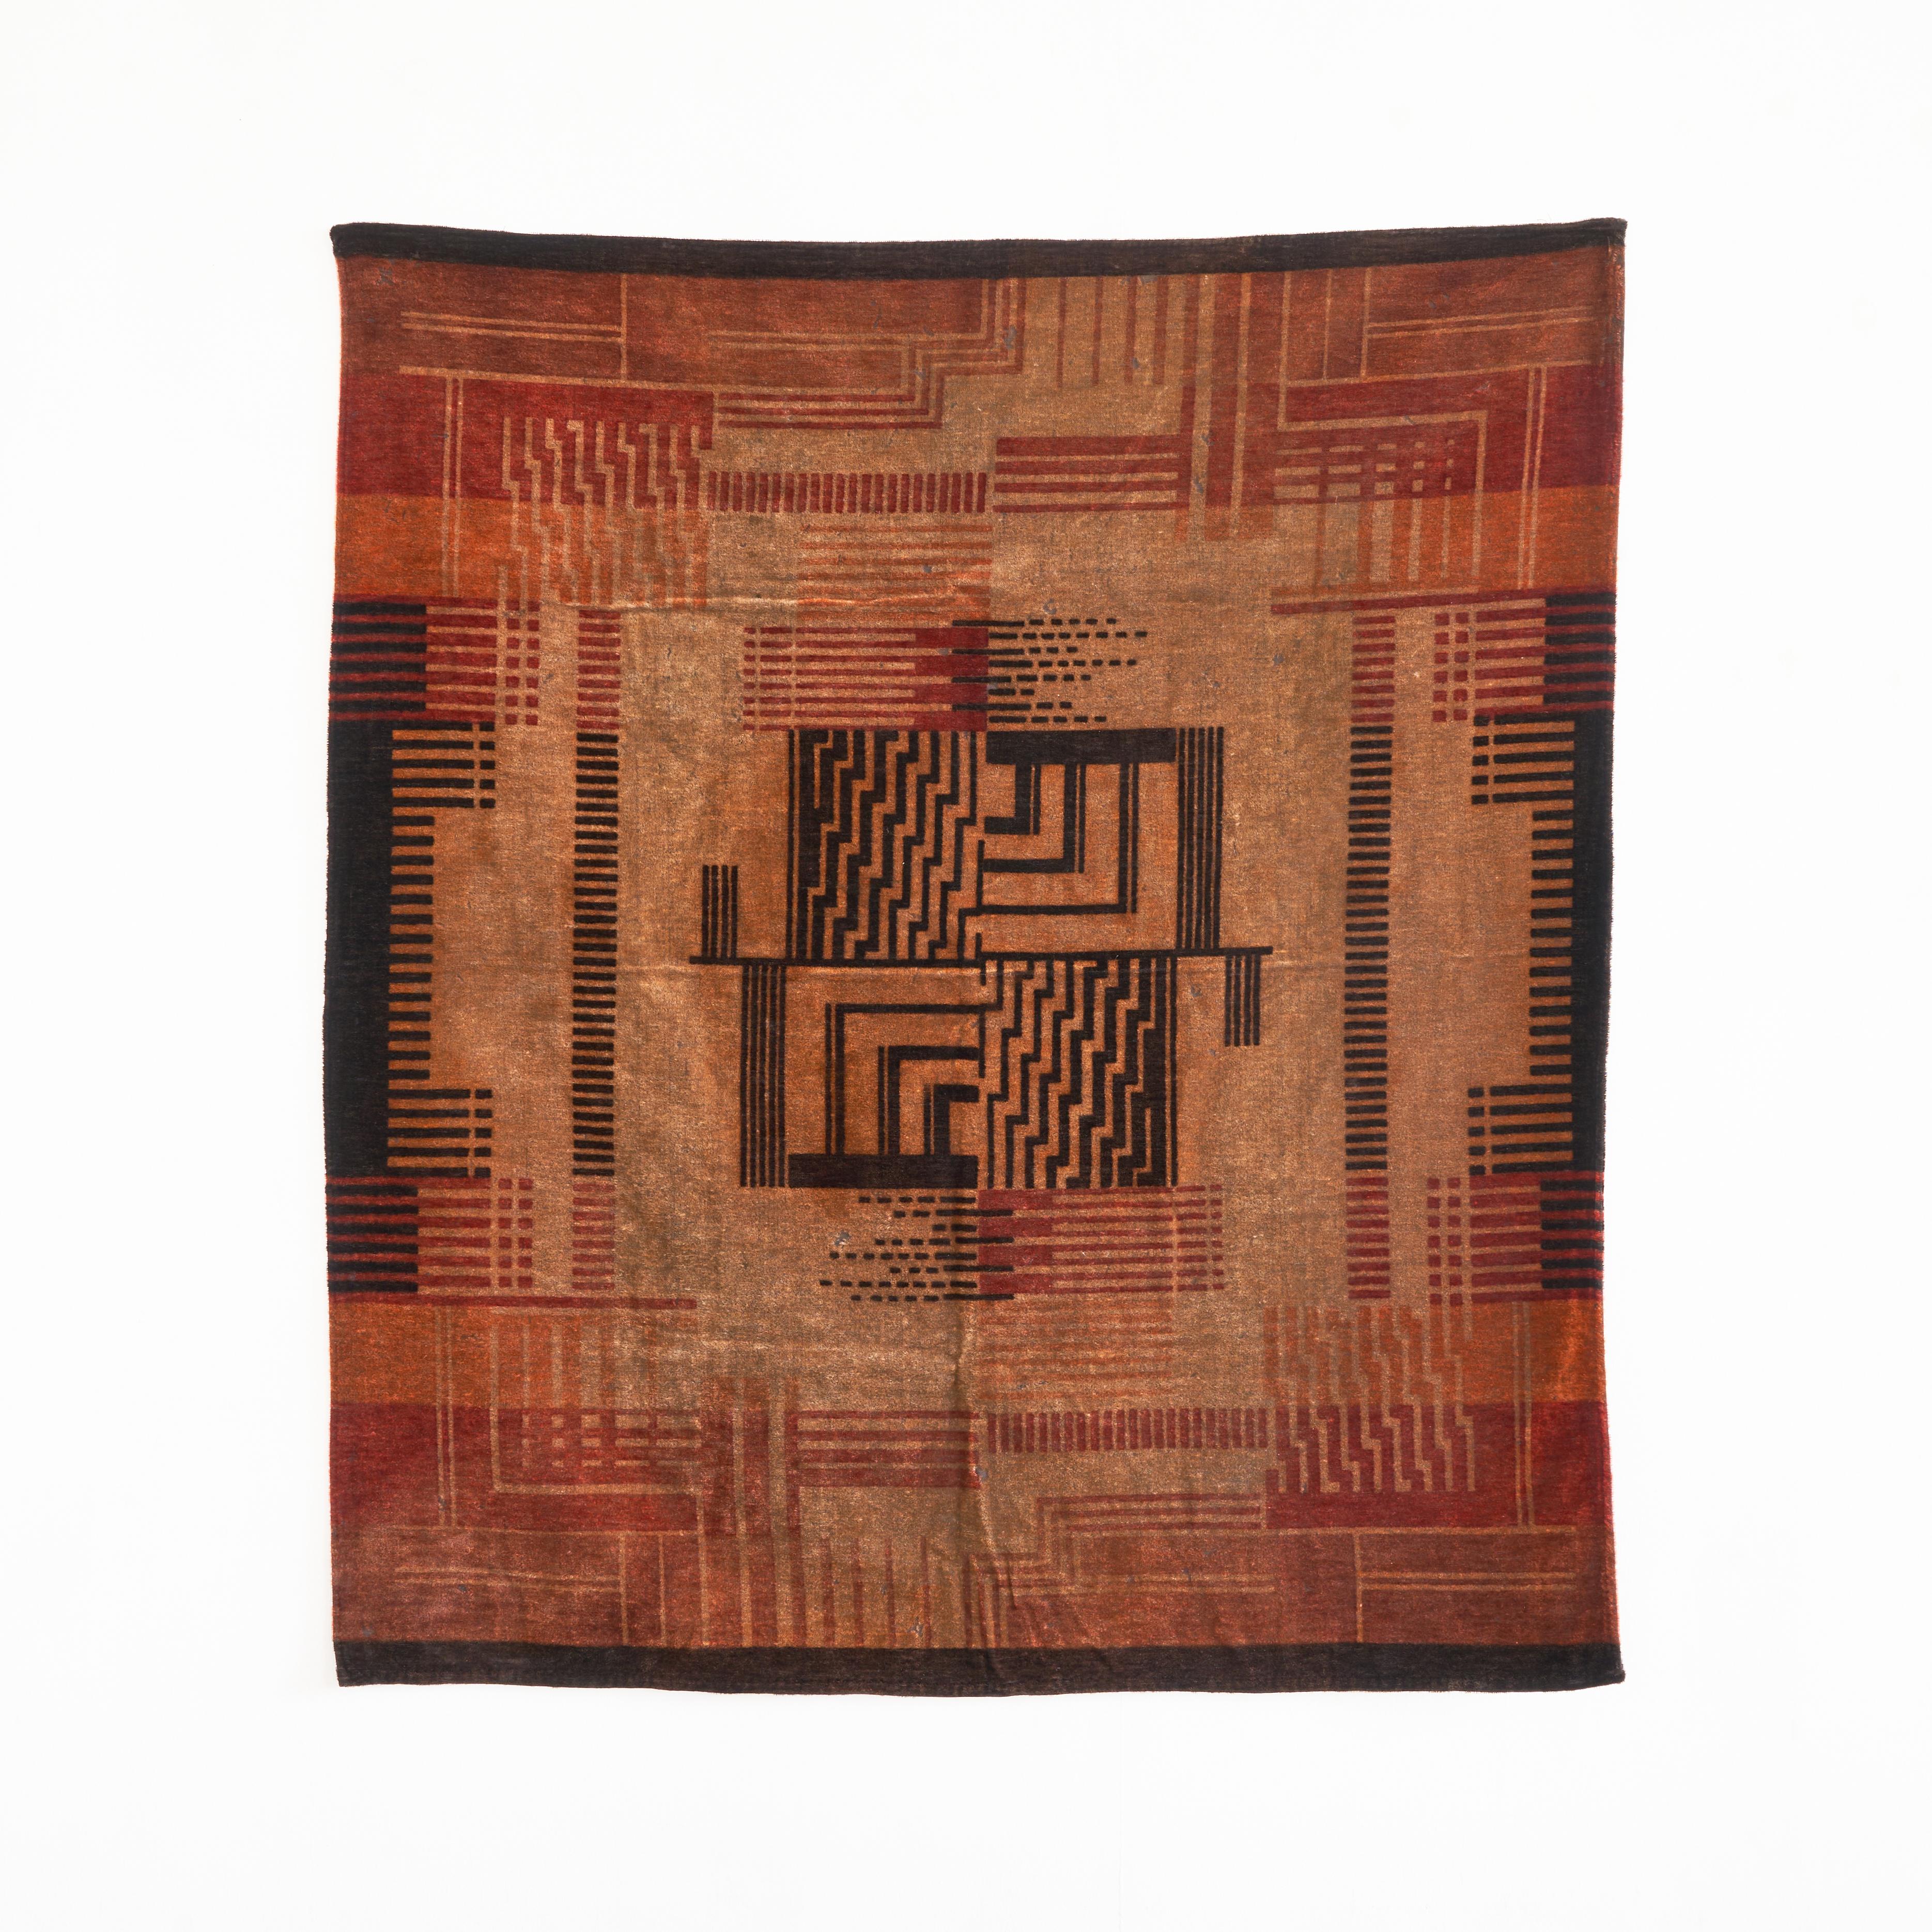 Rare wool wall hanging or table cloth in a distinct modernist / Art Deco / Bauhaus style. A piece with museum quality and a rare gem indeed.

The geometric pattern make it a great art deco piece with strong hints of Bauhaus. You can find